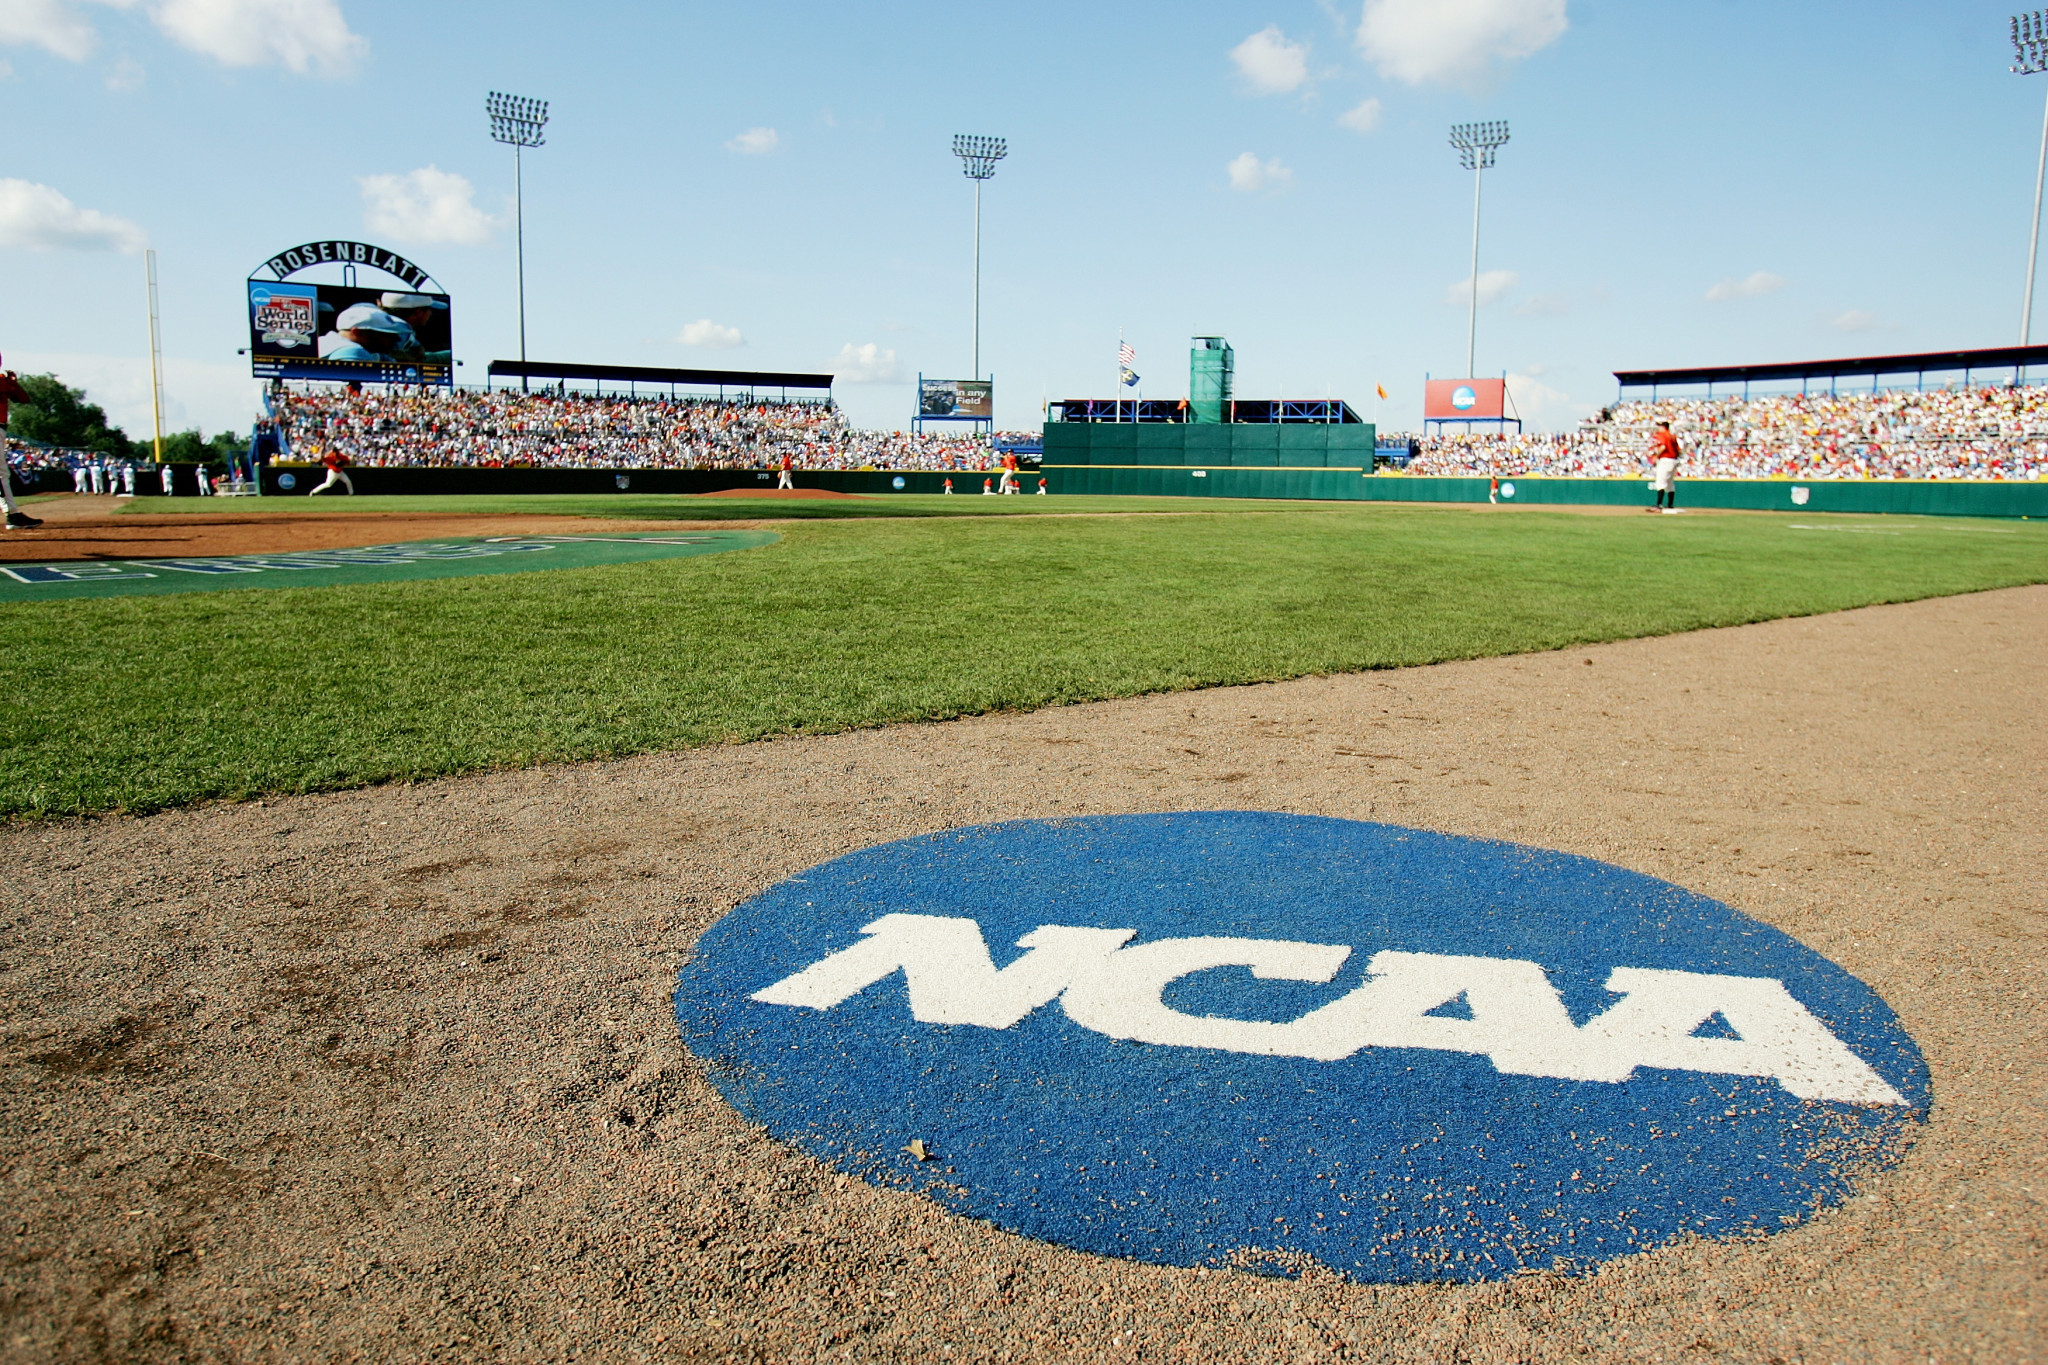 NCAA recovers from COVID-19-hit 2020 with a record revenue of $1.16 billion in 2021